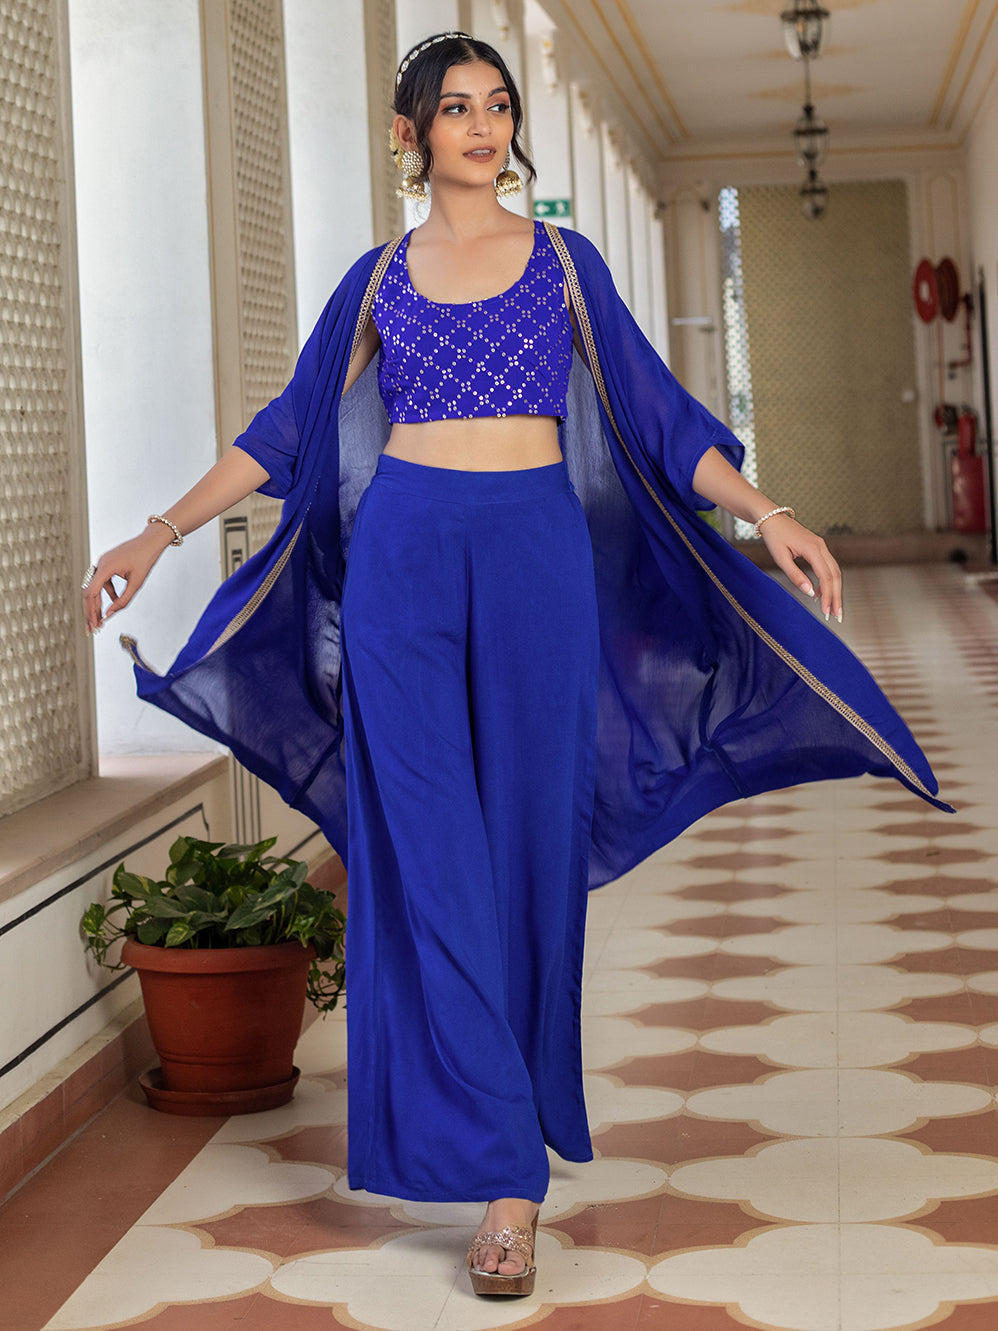 make-a-statement-in-our-blue-co-ord-set-featuring-a-sequin-embroidered-jaal-on-the-crop-top-effortless-elegance-with-a-touch-of-sparkle